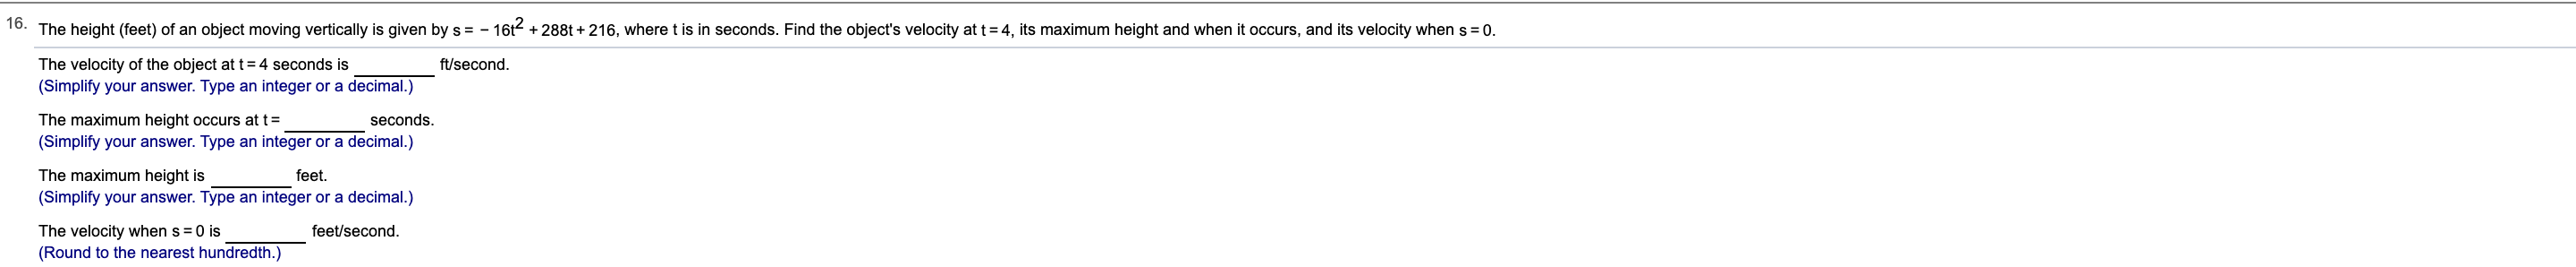 o. The height (feet) of an object moving vertically is given by s = -
16t288t+216, where t is in seconds. Find the object's velocity at t 4, its maximum height and when it occurs, and its velocity when s
0.
The velocity of the object at t4 seconds is
(Simplify your answer. Type an integer or a decimal.)
ft/second
The maximum height occurs at t=
seconds.
(Simplify your answer. Type an integer or a decimal.)
The maximum height is
feet
(Simplify your answer. Type an integer or a decimal.)
feet/second
The velocity when s 0 is
(Round to the nearest hundredth.)
